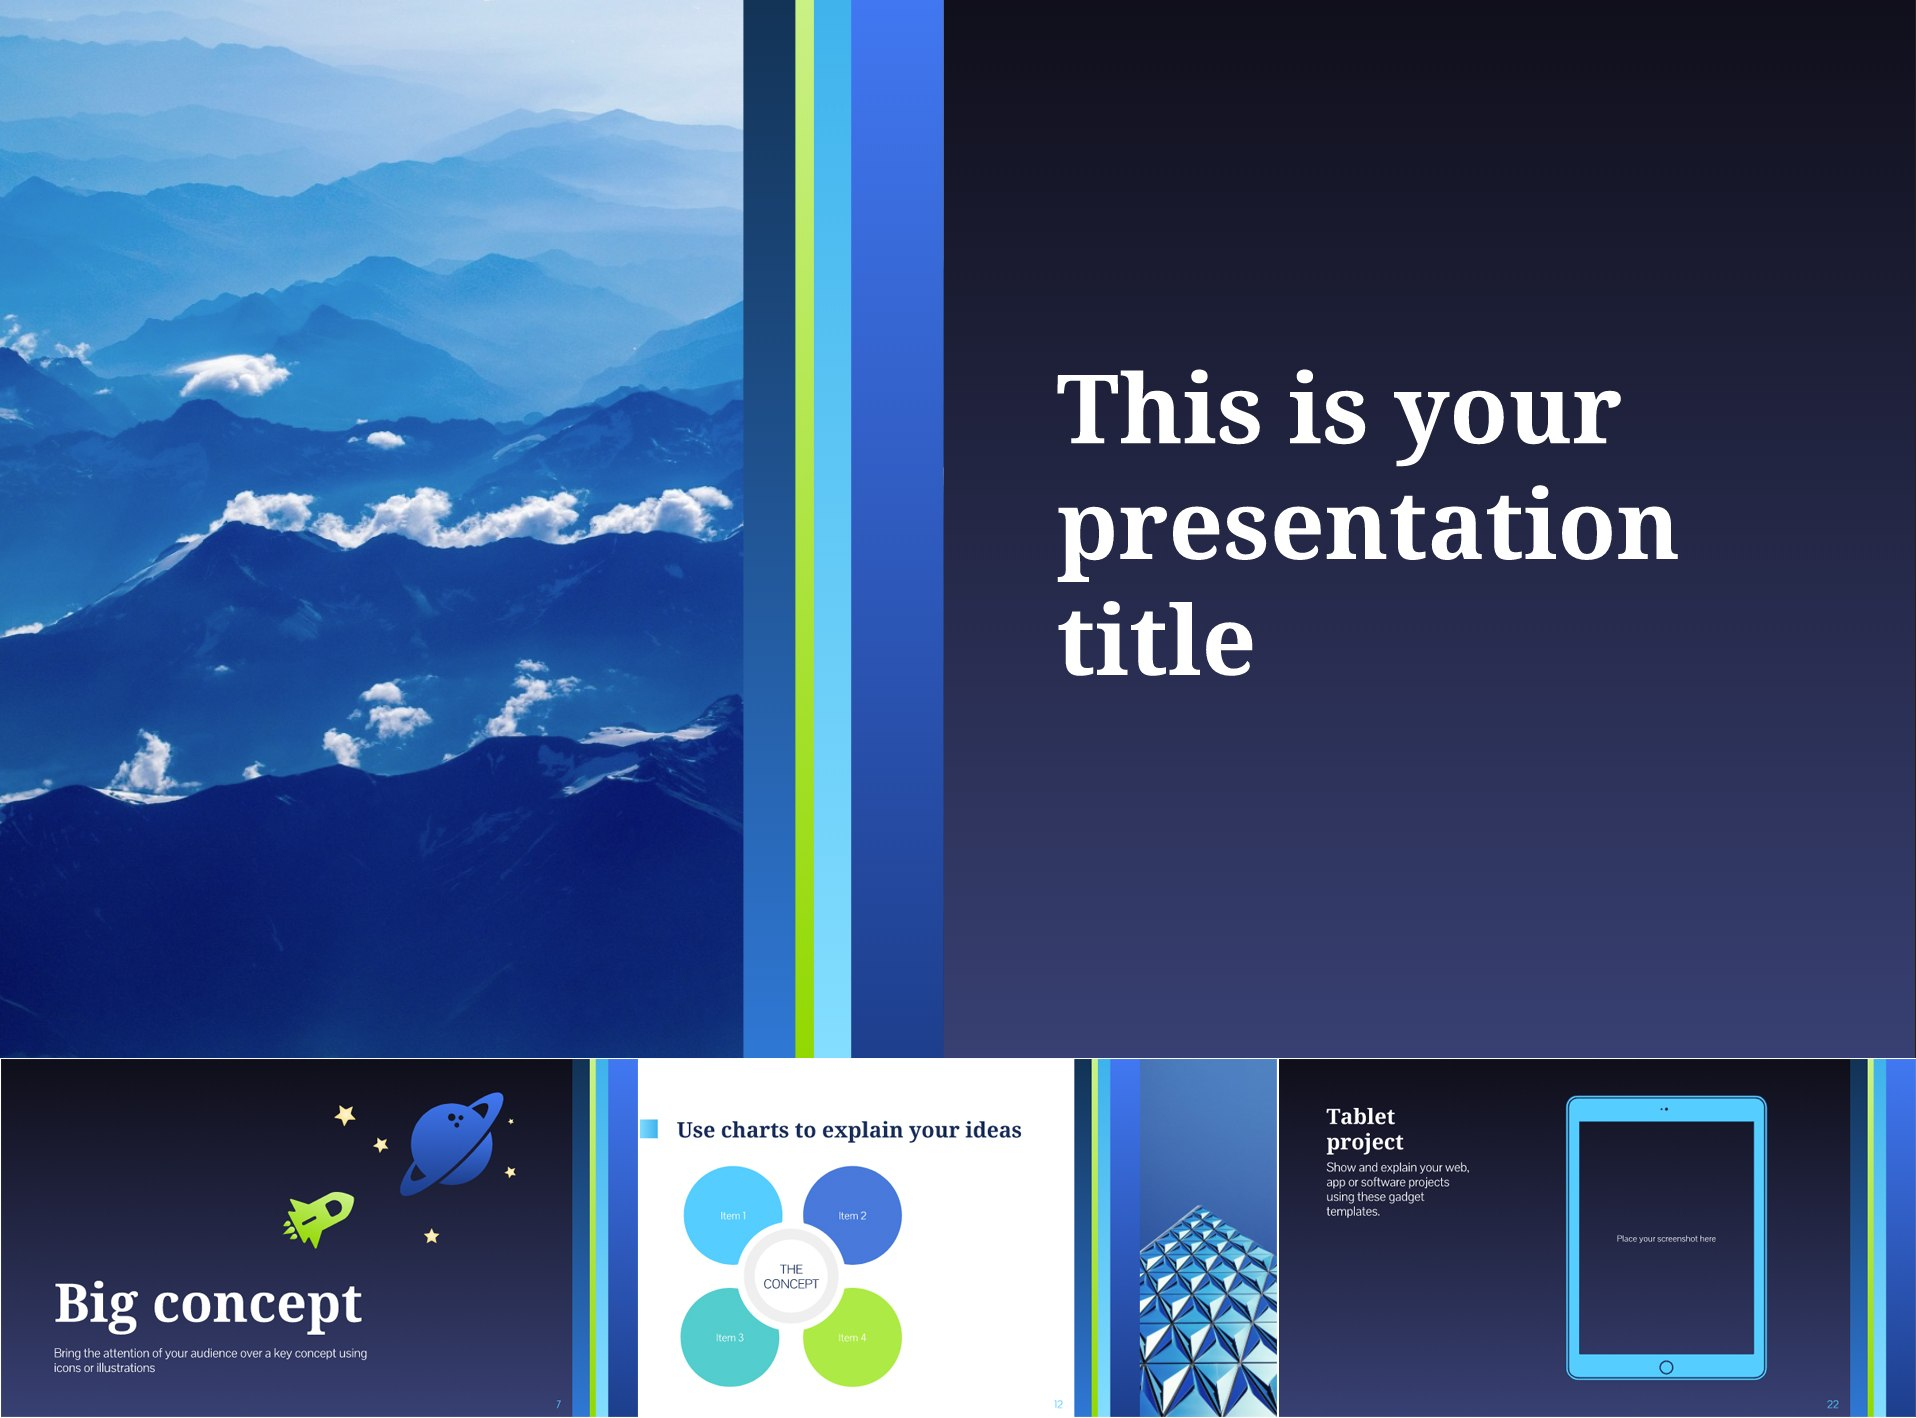 Free Google Slides Templates For Your Next Presentation intended for Google Drive Presentation Templates